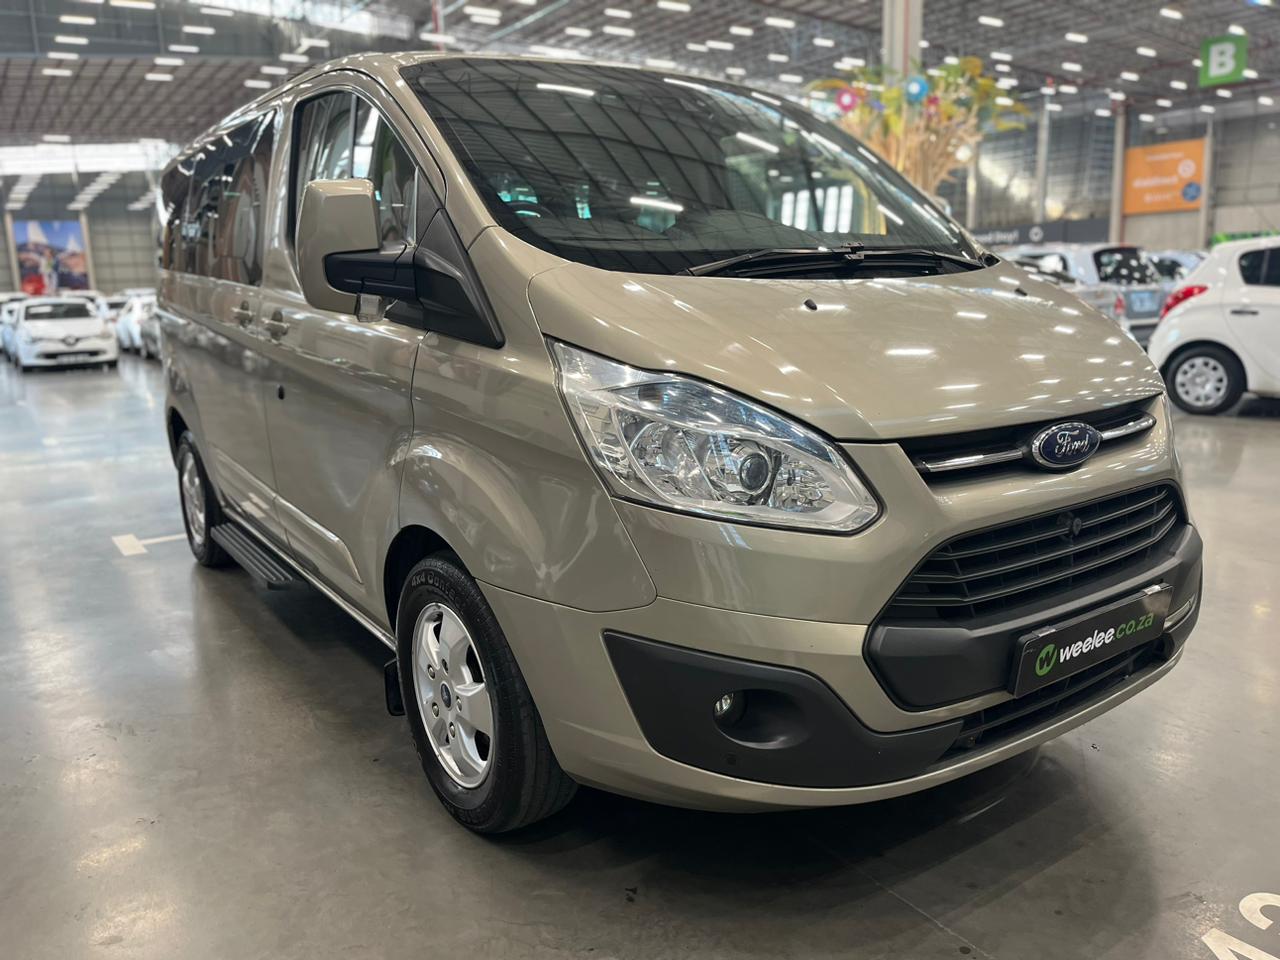 2015 Ford Tourneo Custom 2.2TDCi SWB Limited For Sale